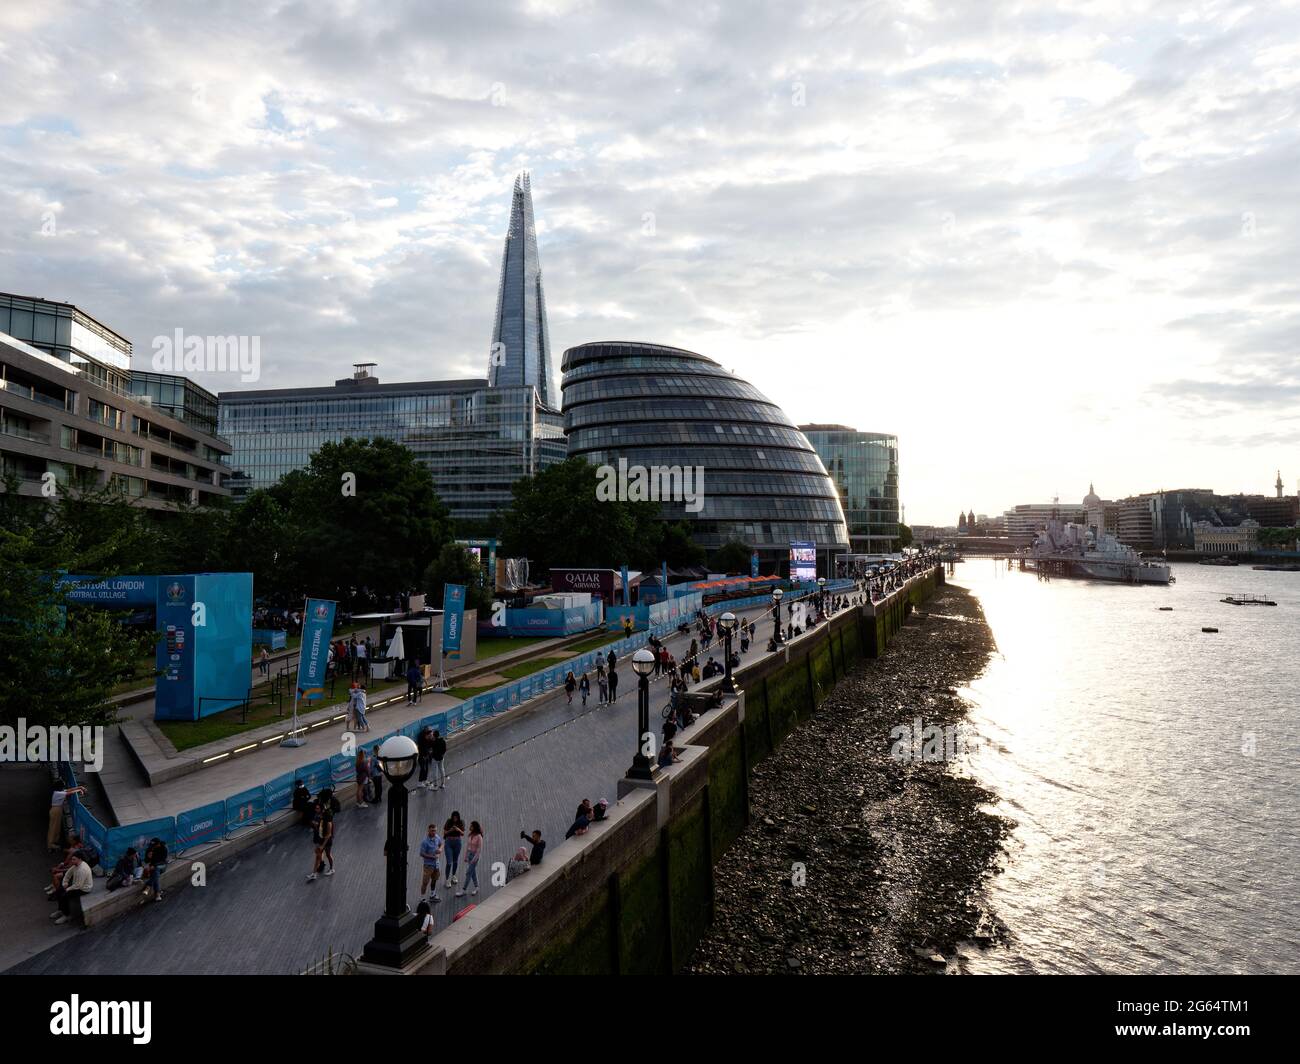 London, Greater London, England - June 26 2021: UEFA Festival London for Euro 2020 takes place on the south bank of the River Thames beside City Hall. Stock Photo